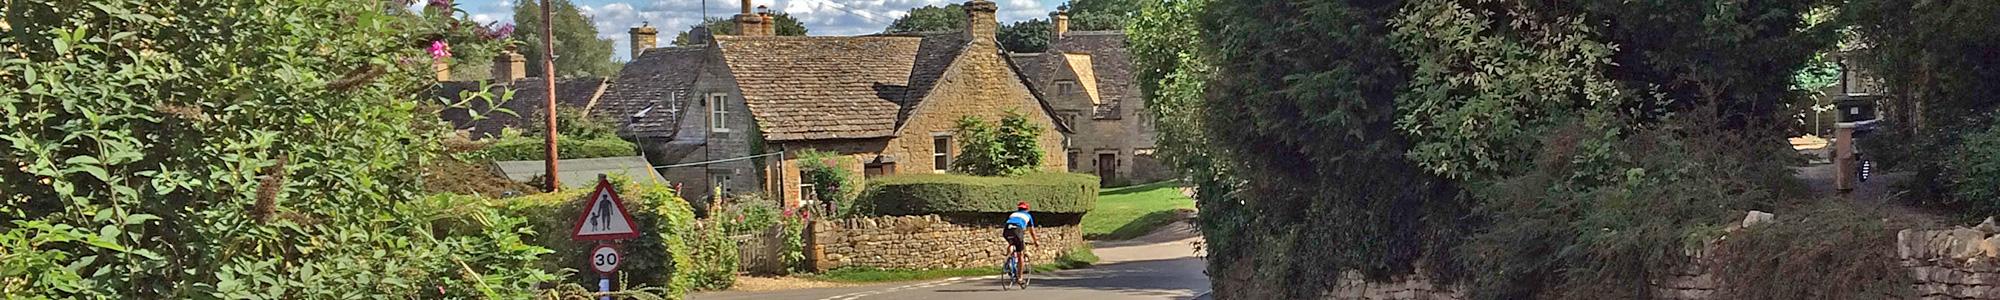 Cycling Holidays Cotswolds with UK Bike Tours